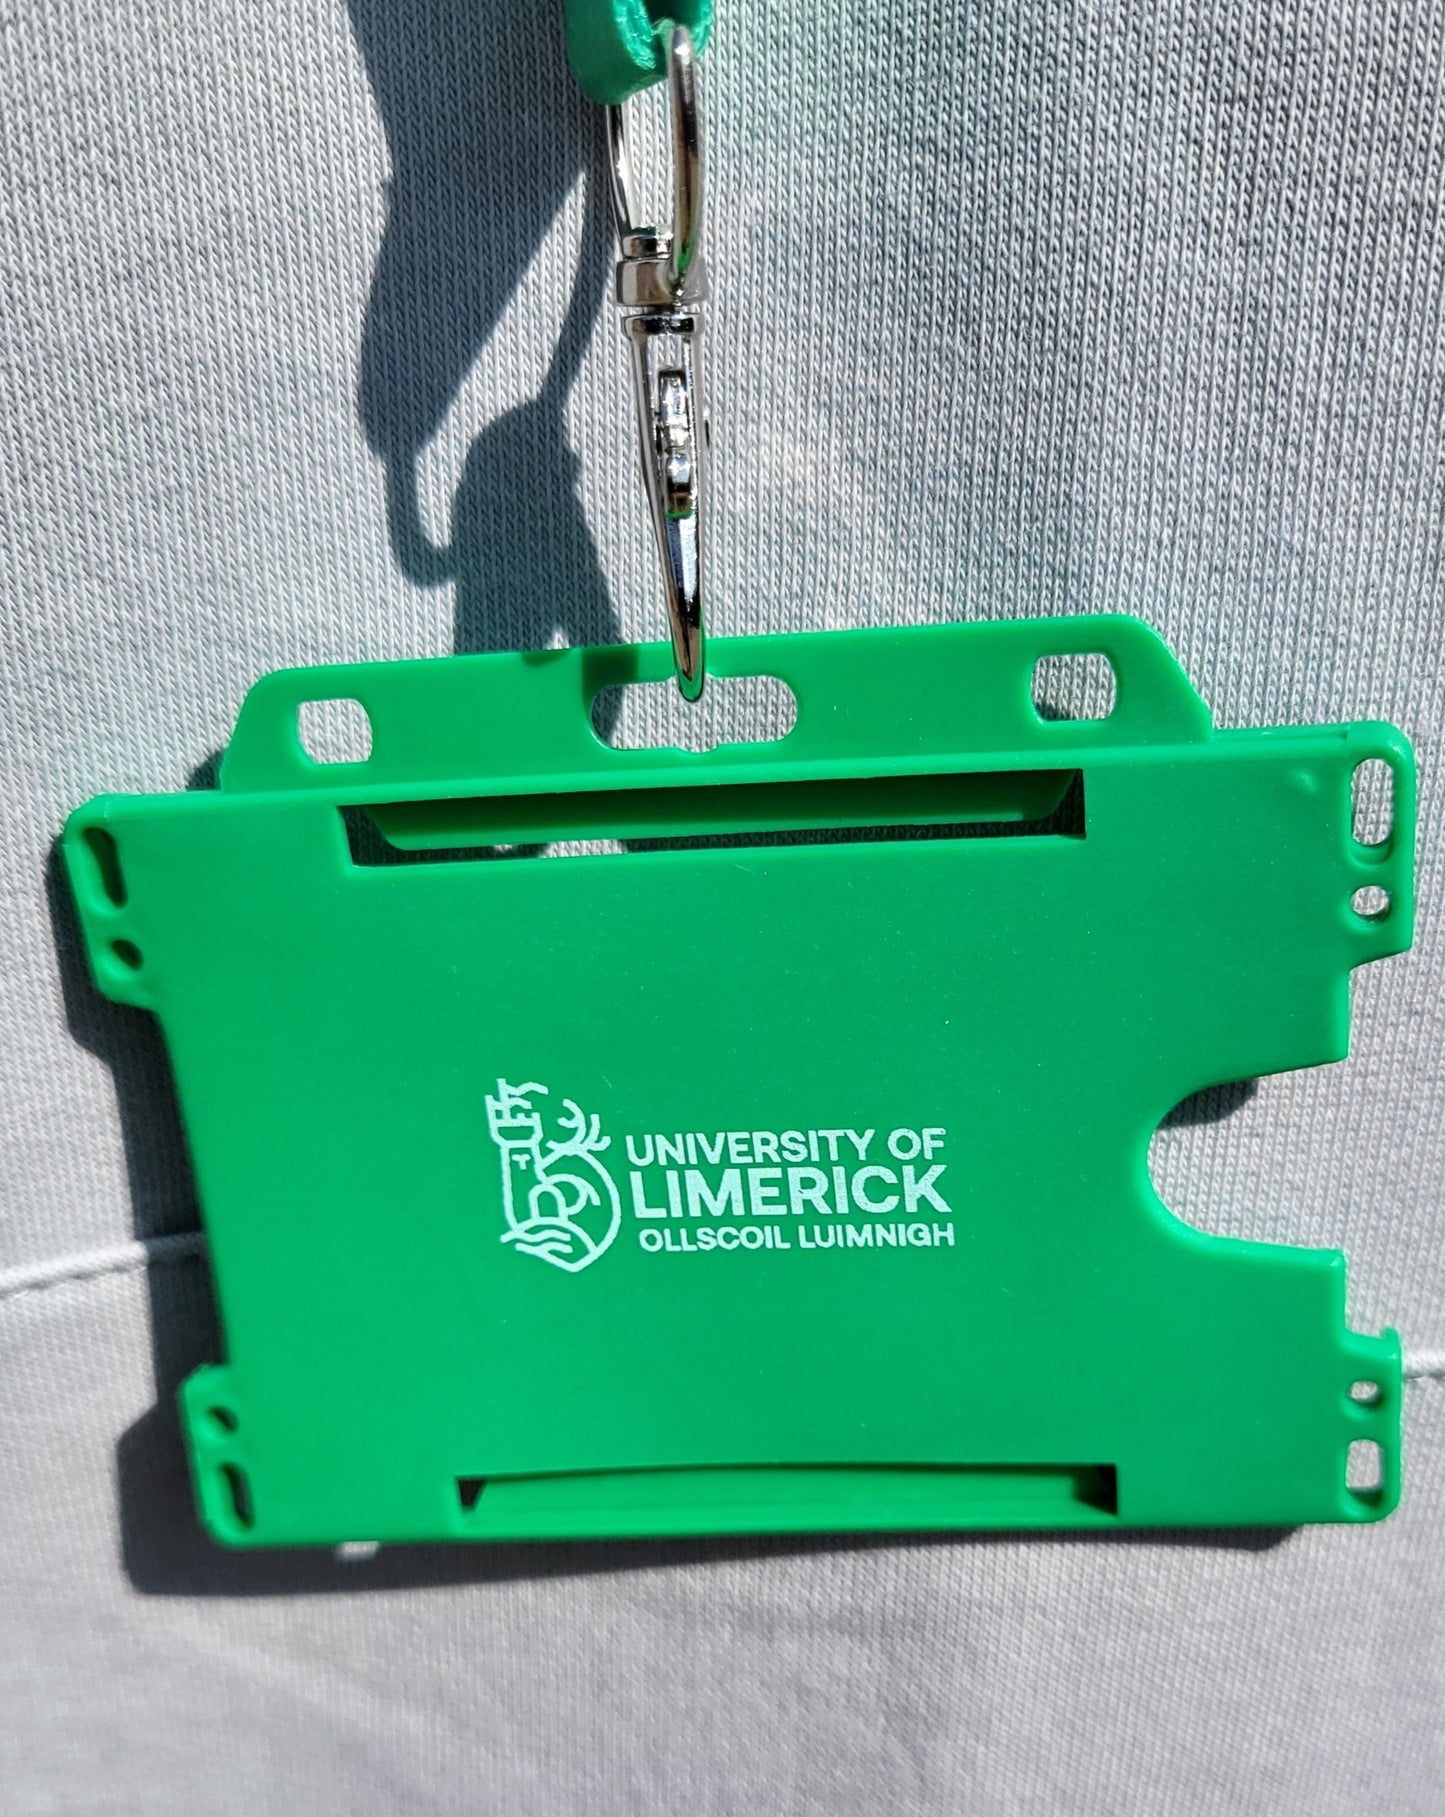 Lanyard Staff/Student ID holder (lanyard not included)